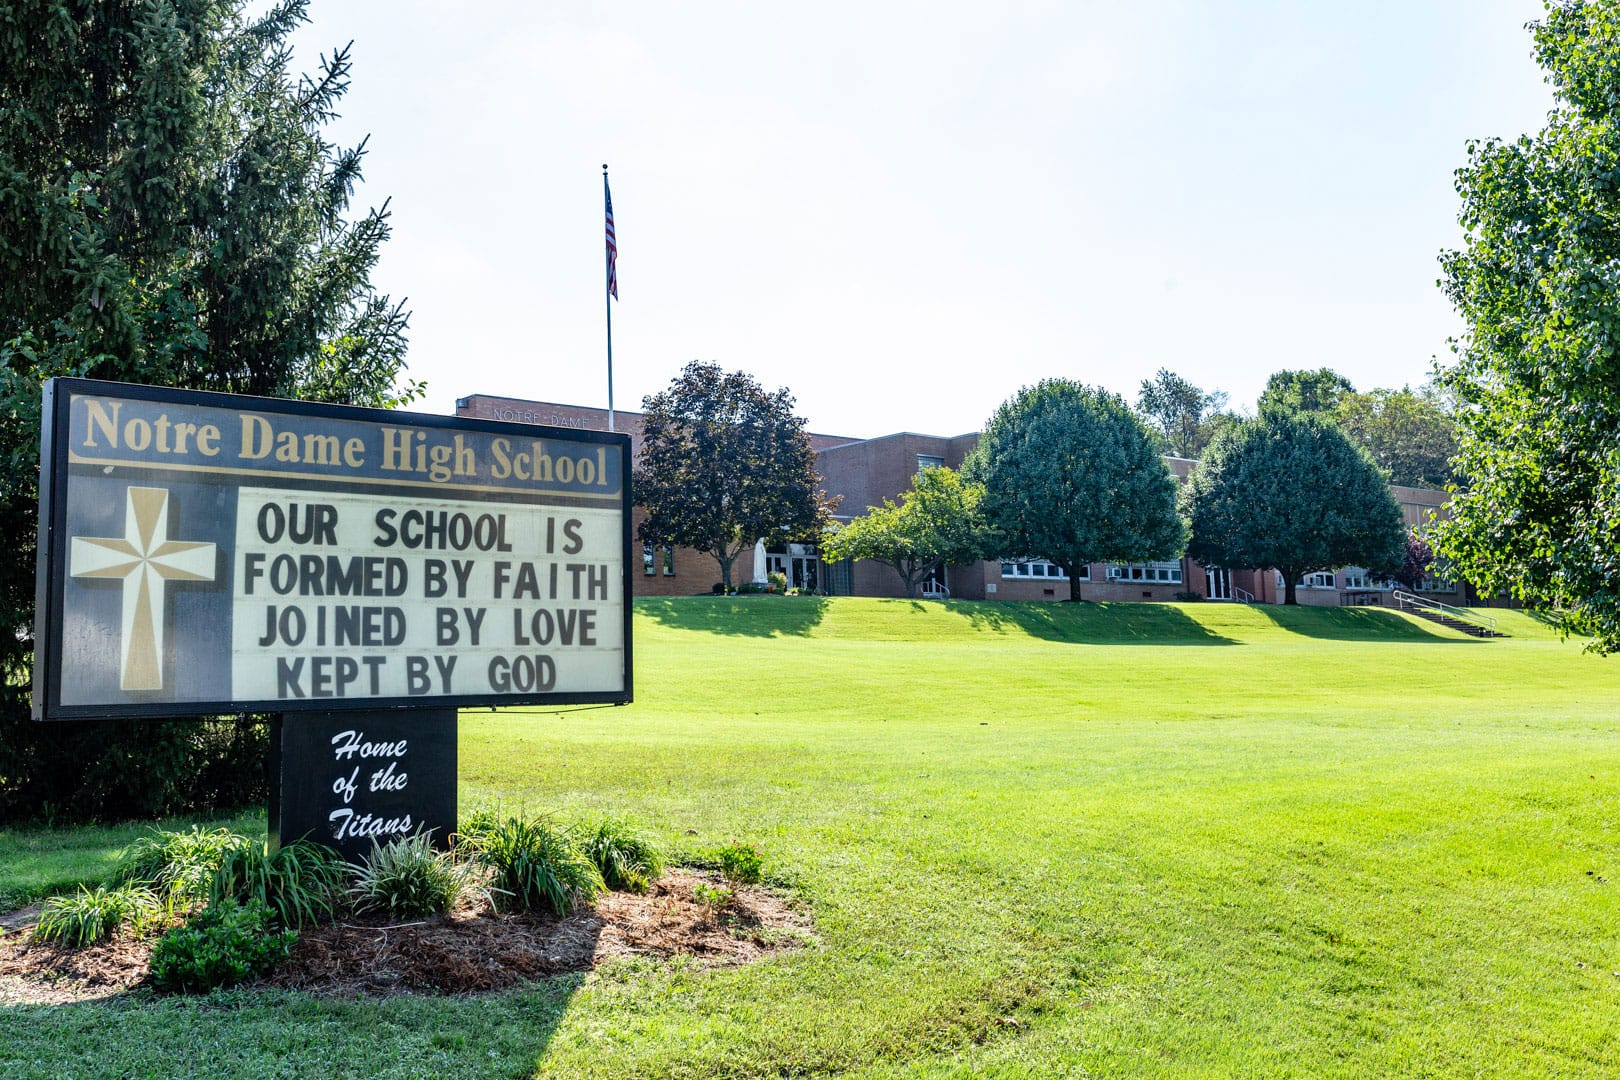 Exterior and sign for Notre Dame High School.